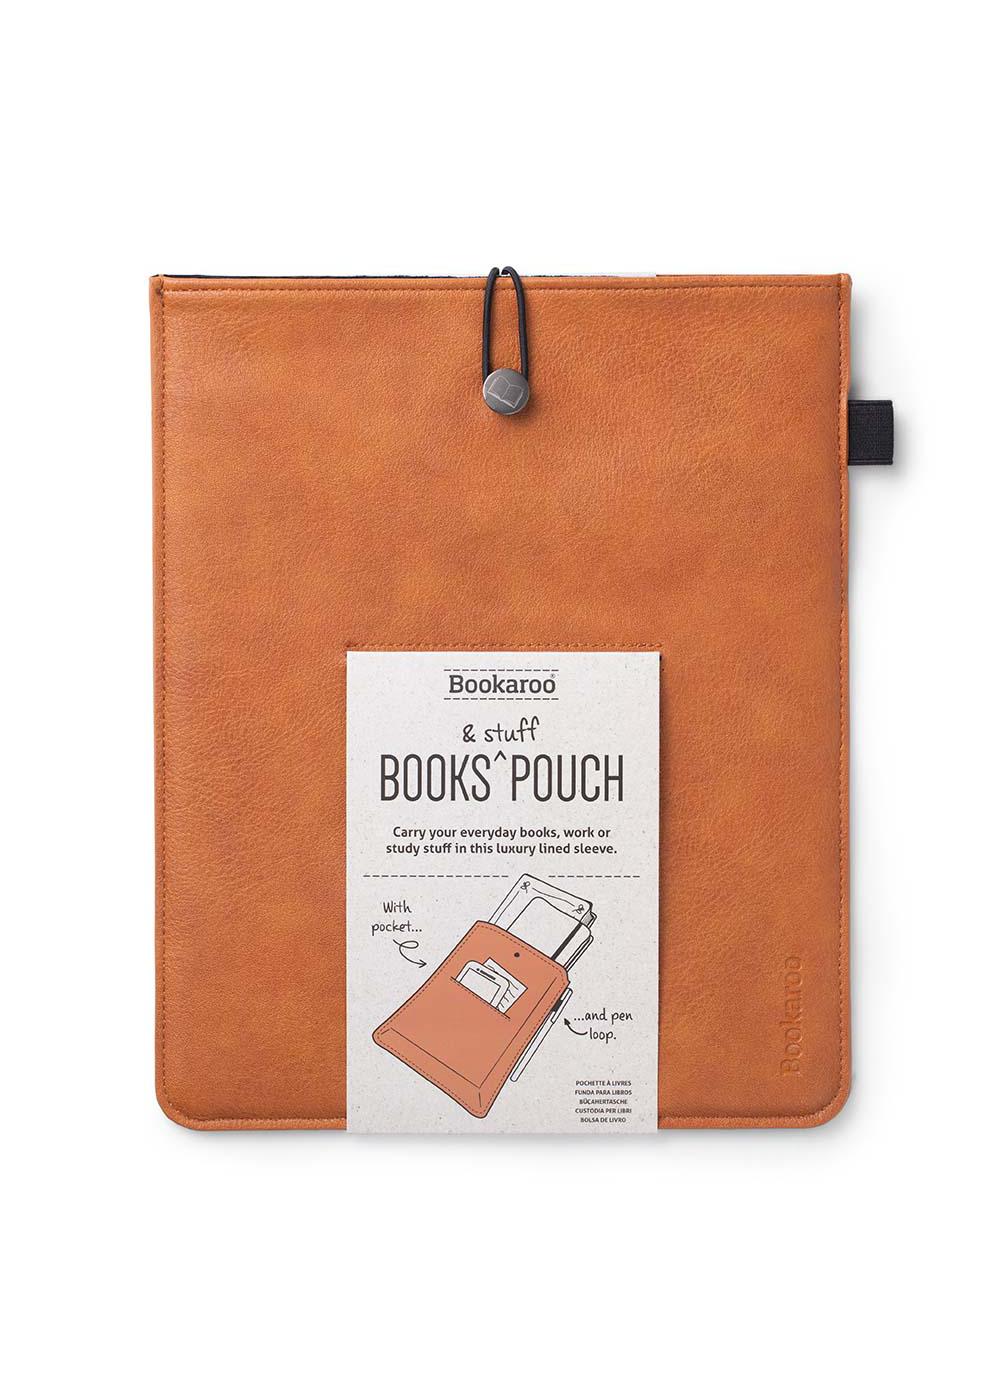 Bookaroo Books & Stuff Pouch – Brown; image 1 of 5